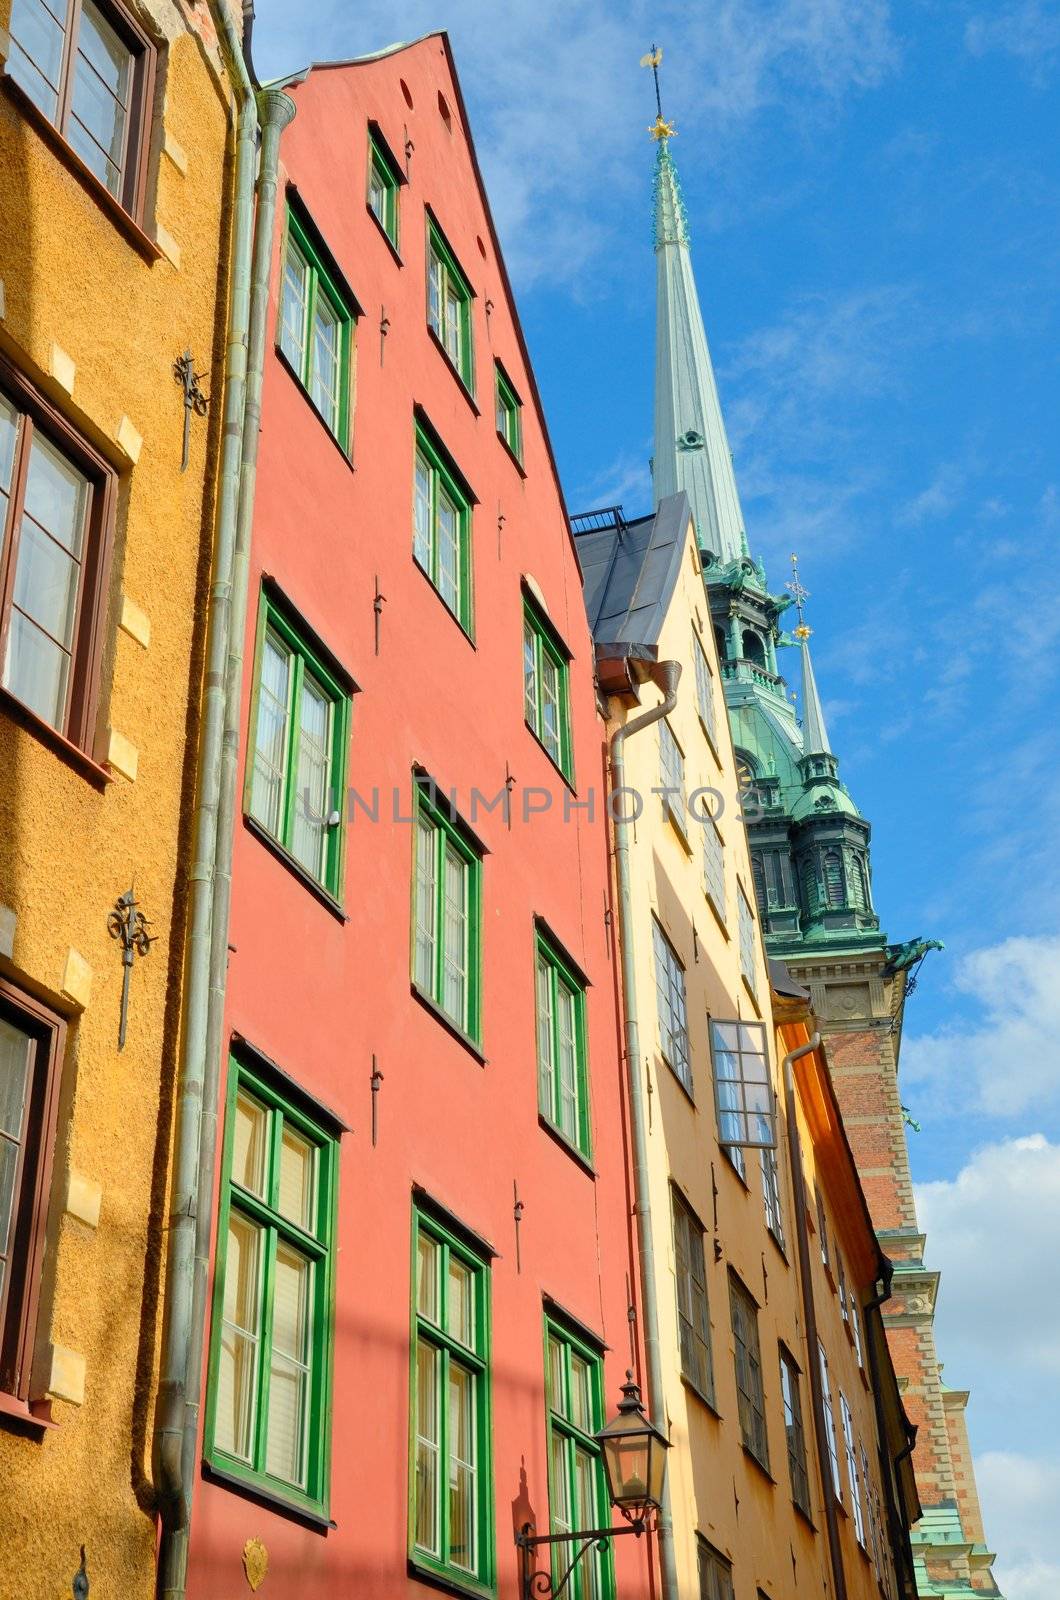 Stockholm, the capital of Sweden, is one of the most beautiful town of Europe